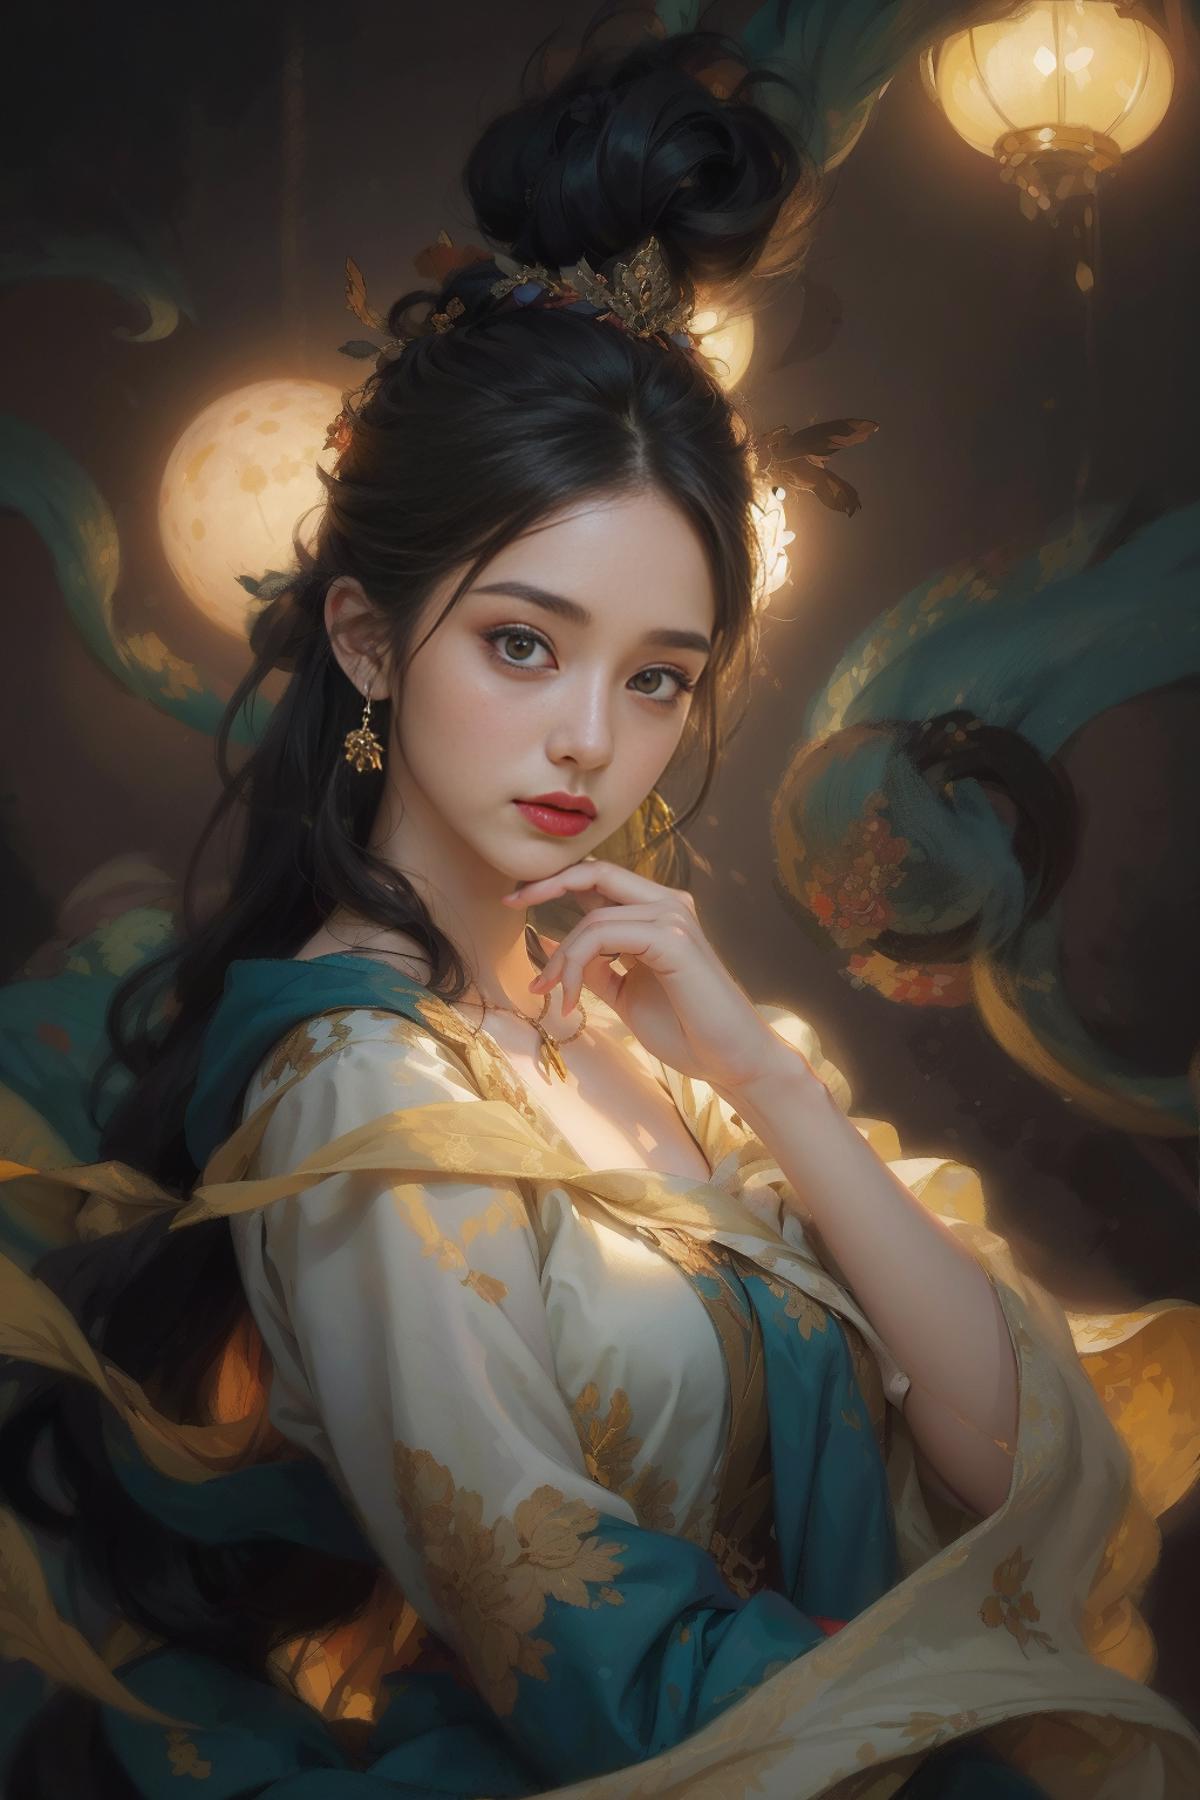 A beautifully detailed painting of a woman in a blue dress holding her chin.